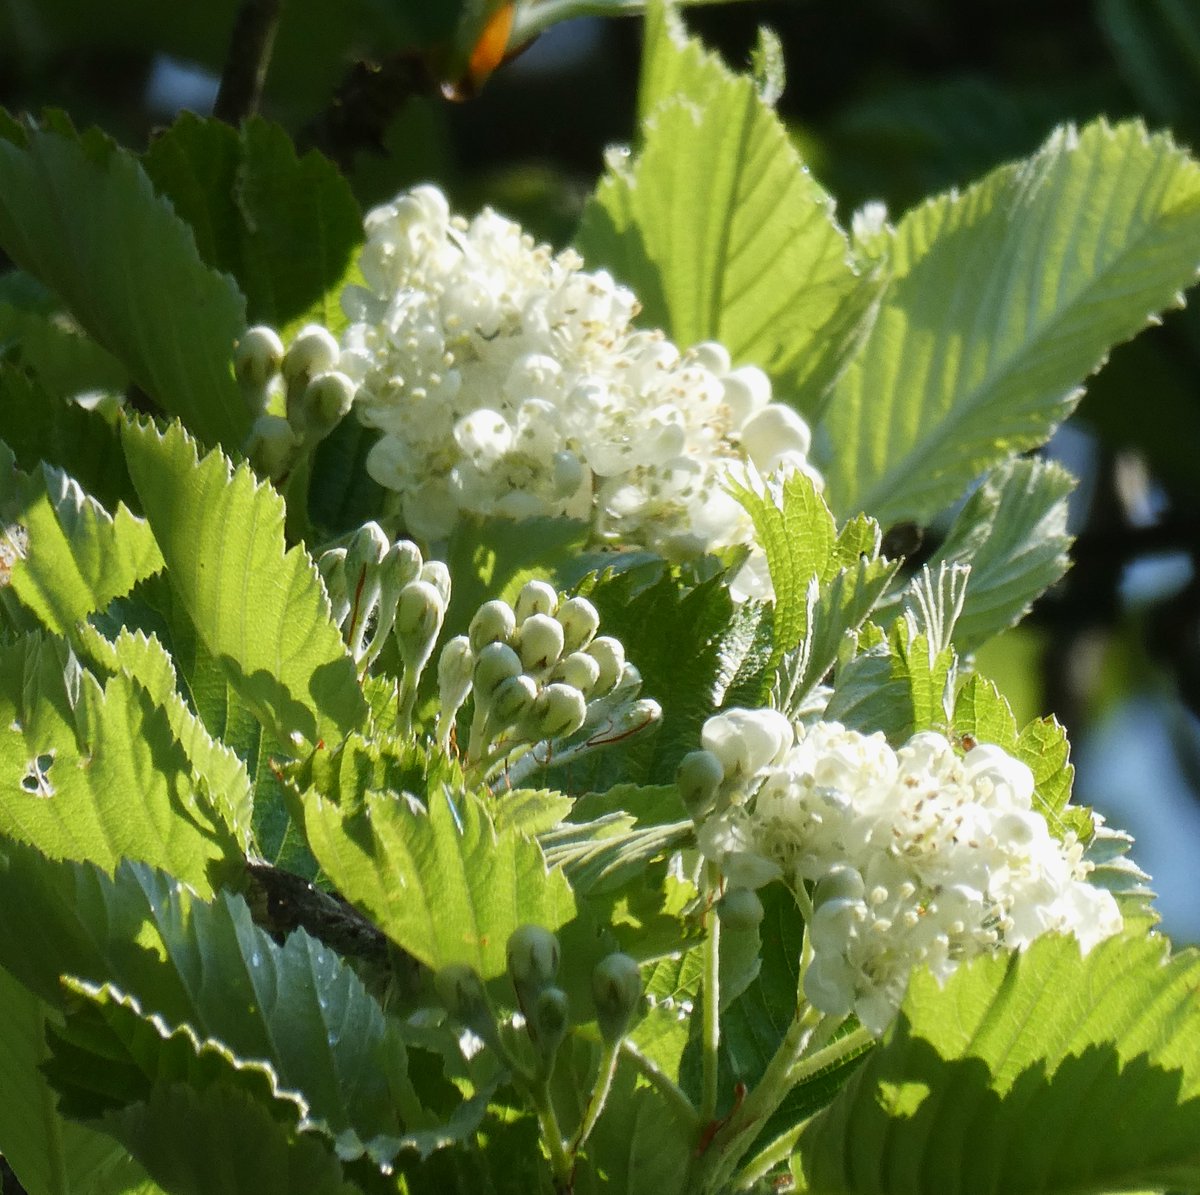 'Wind-beat whitebeam! airy abeles set on a flare!' (Hopkins) Whitebeam (white + Old English 'bēam' - tree) is just turning frothy with white flowers. But the name refers to the pale underside of the leaves - shown off to perfection as the leaves unfold 🤍